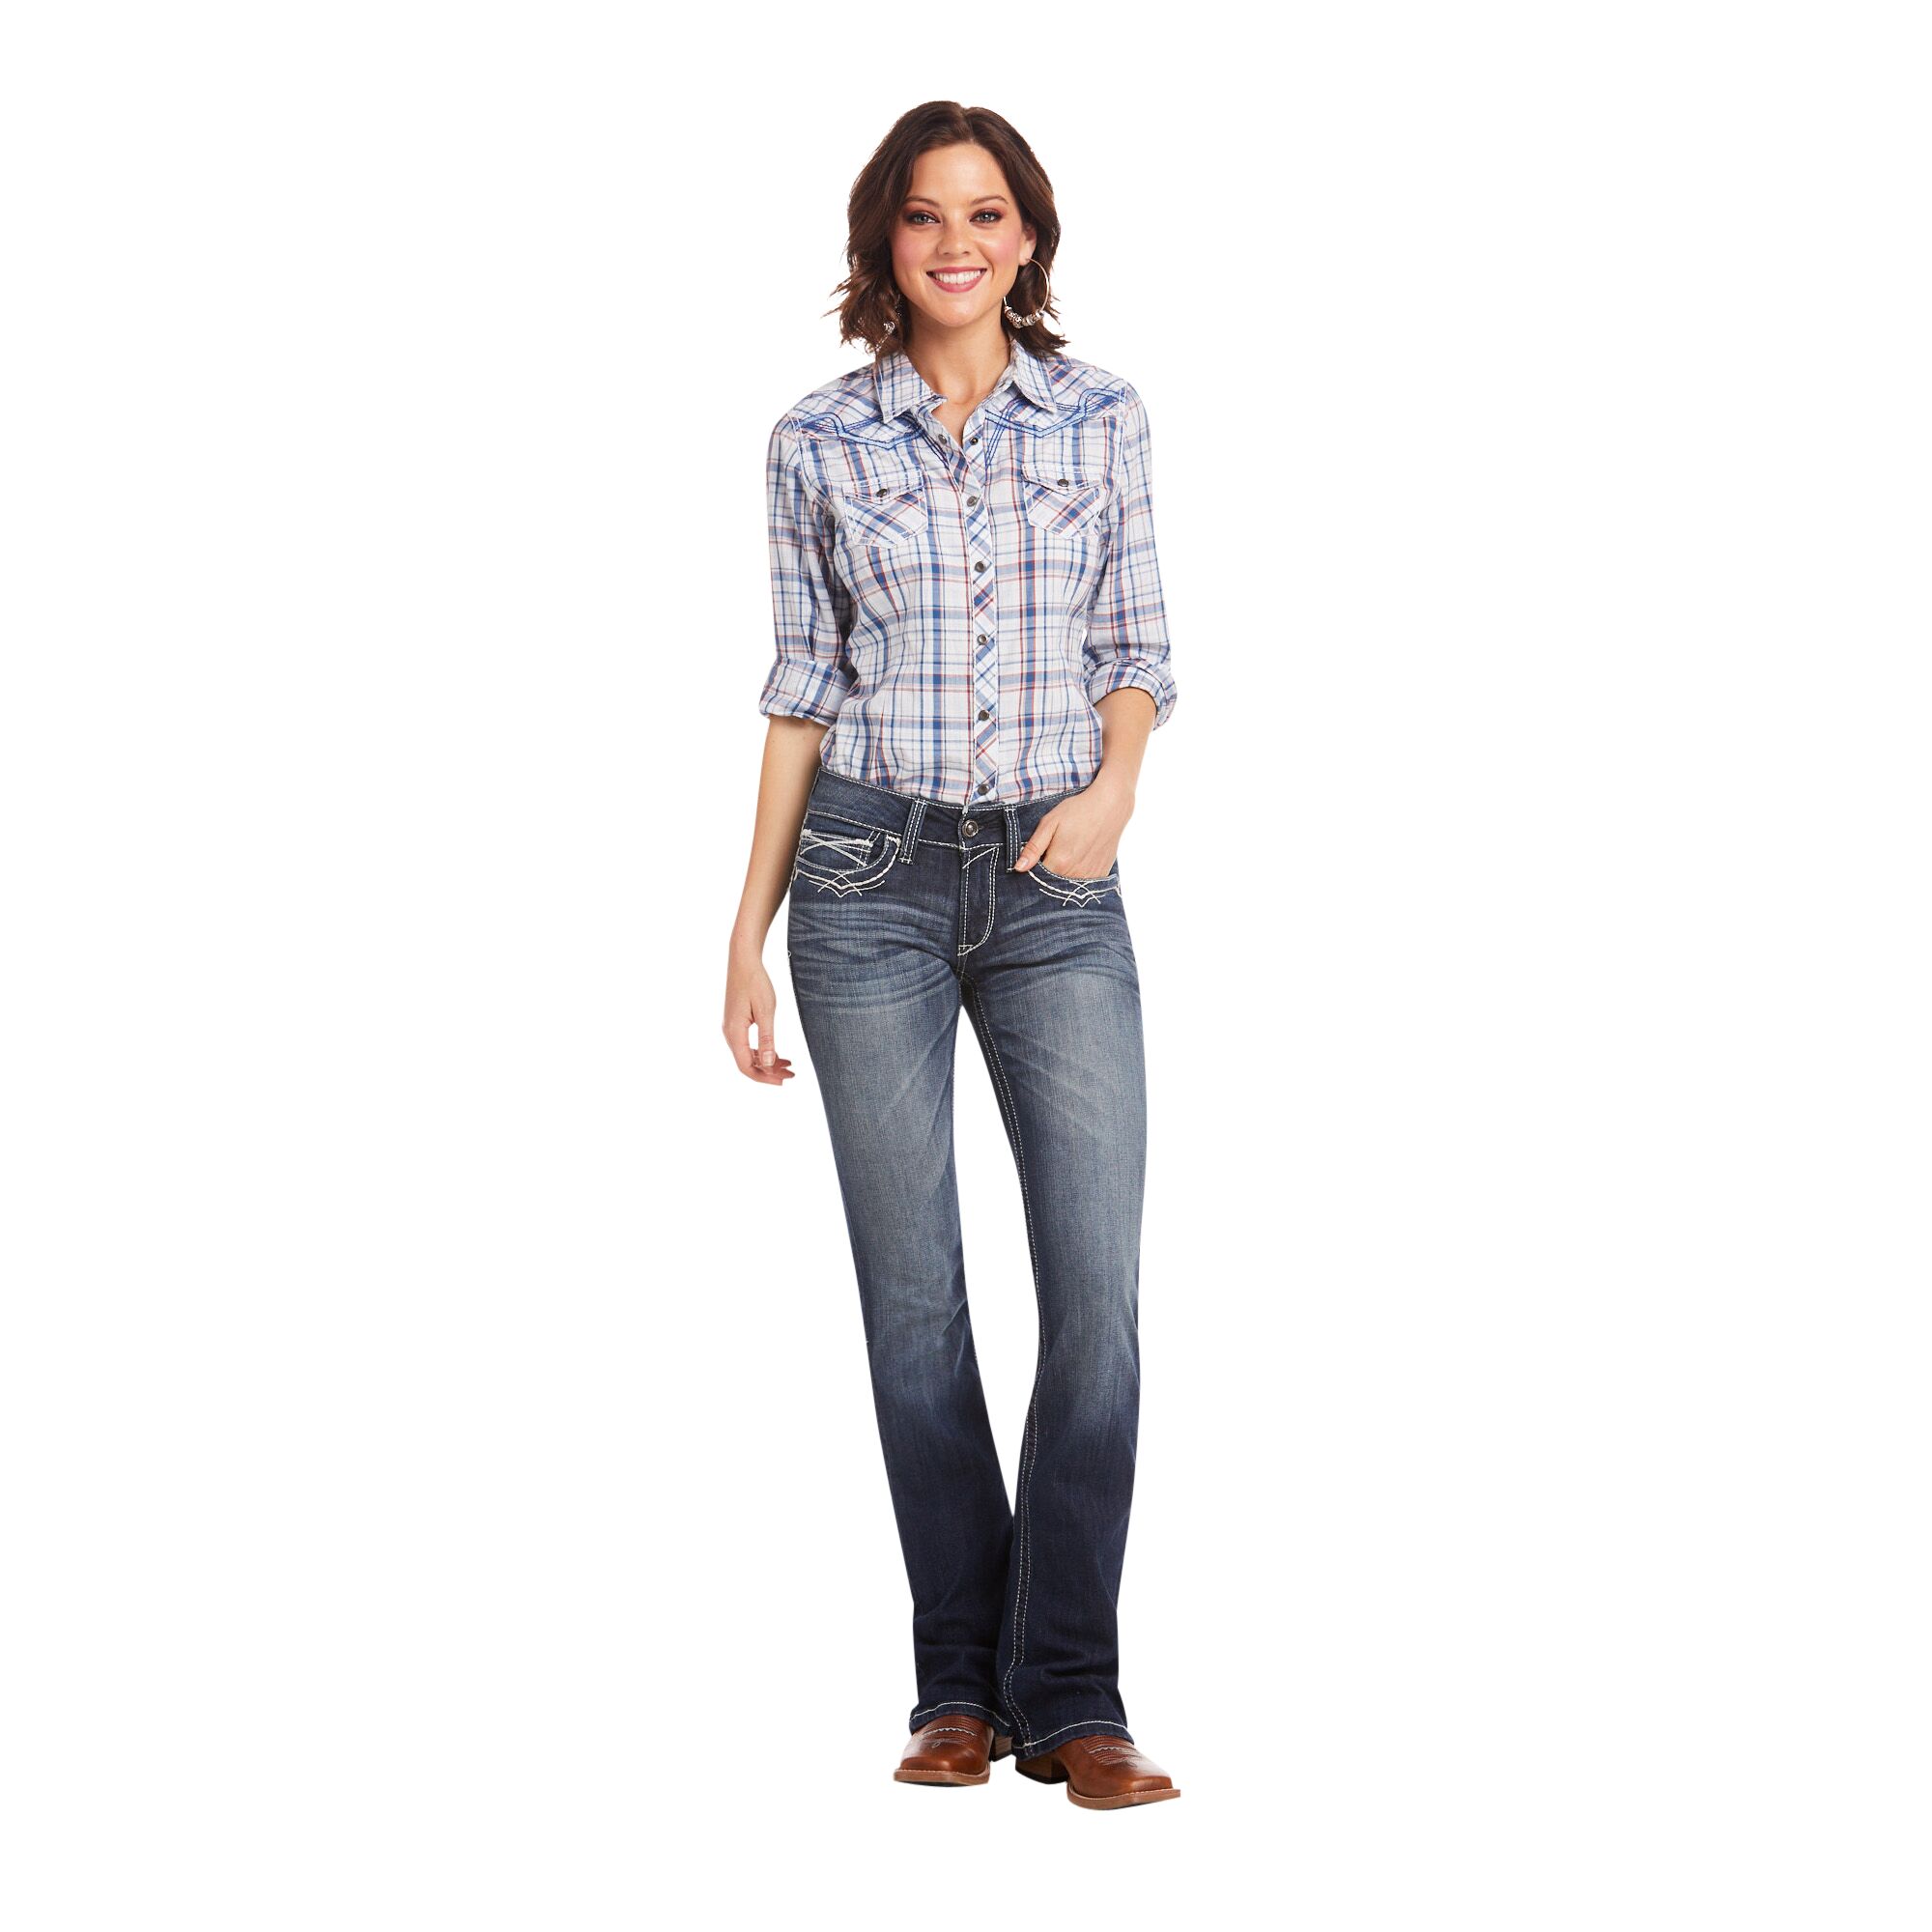 Women's R.E.A.L. Mid-Rise Stretch Entwined Bootcut Jean in Marine